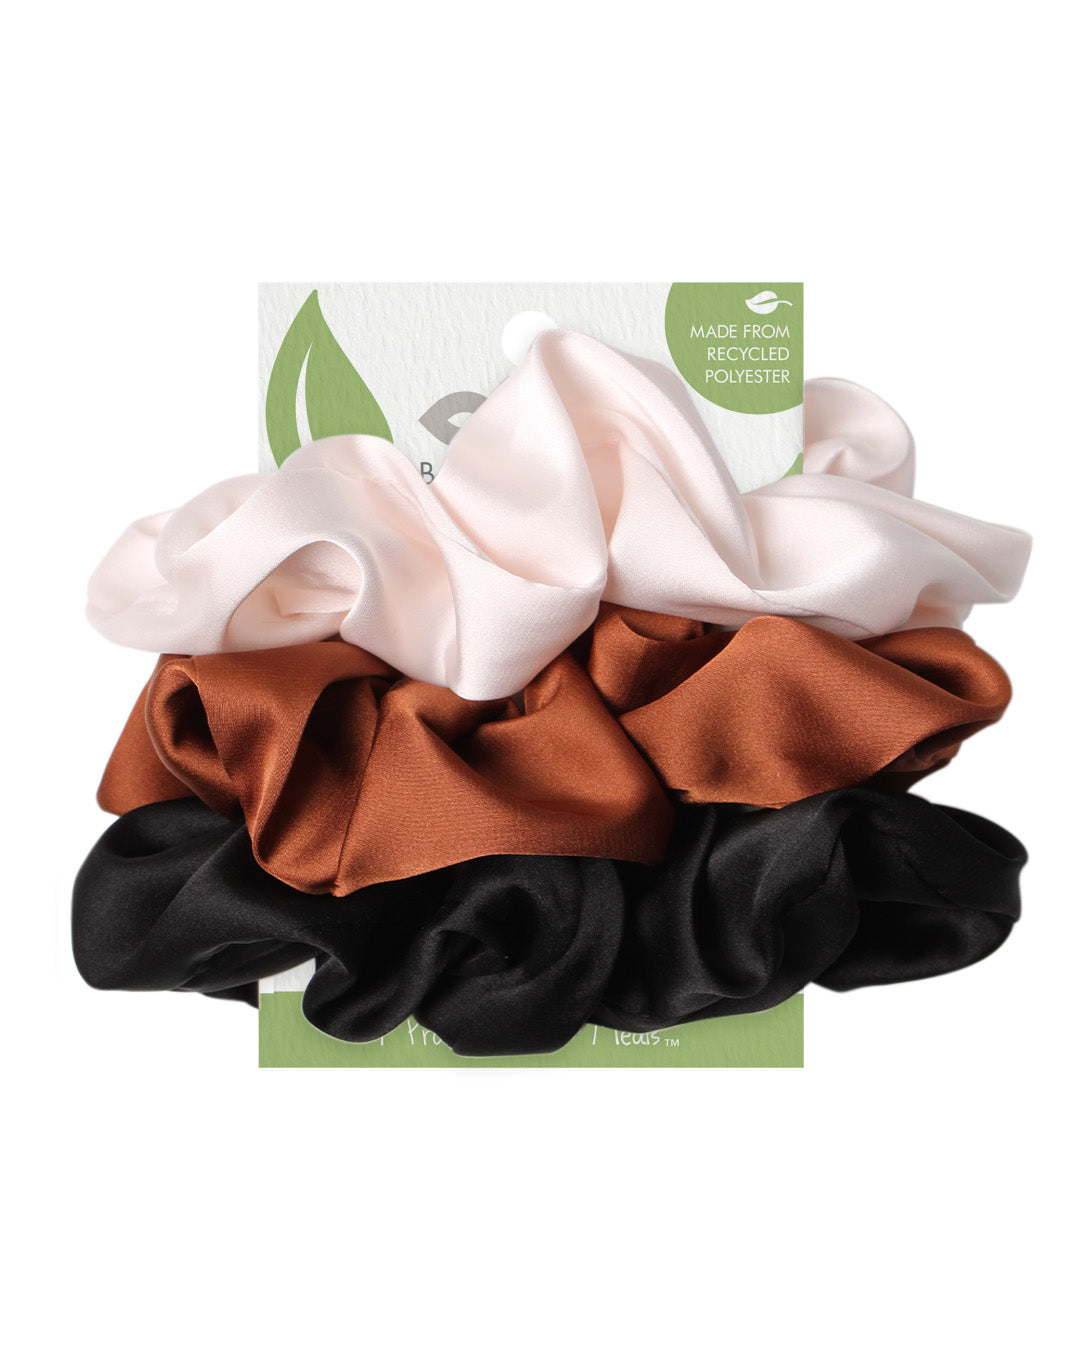 Eco Garden - Recycled Scrunchies BANDED Hair Accessories